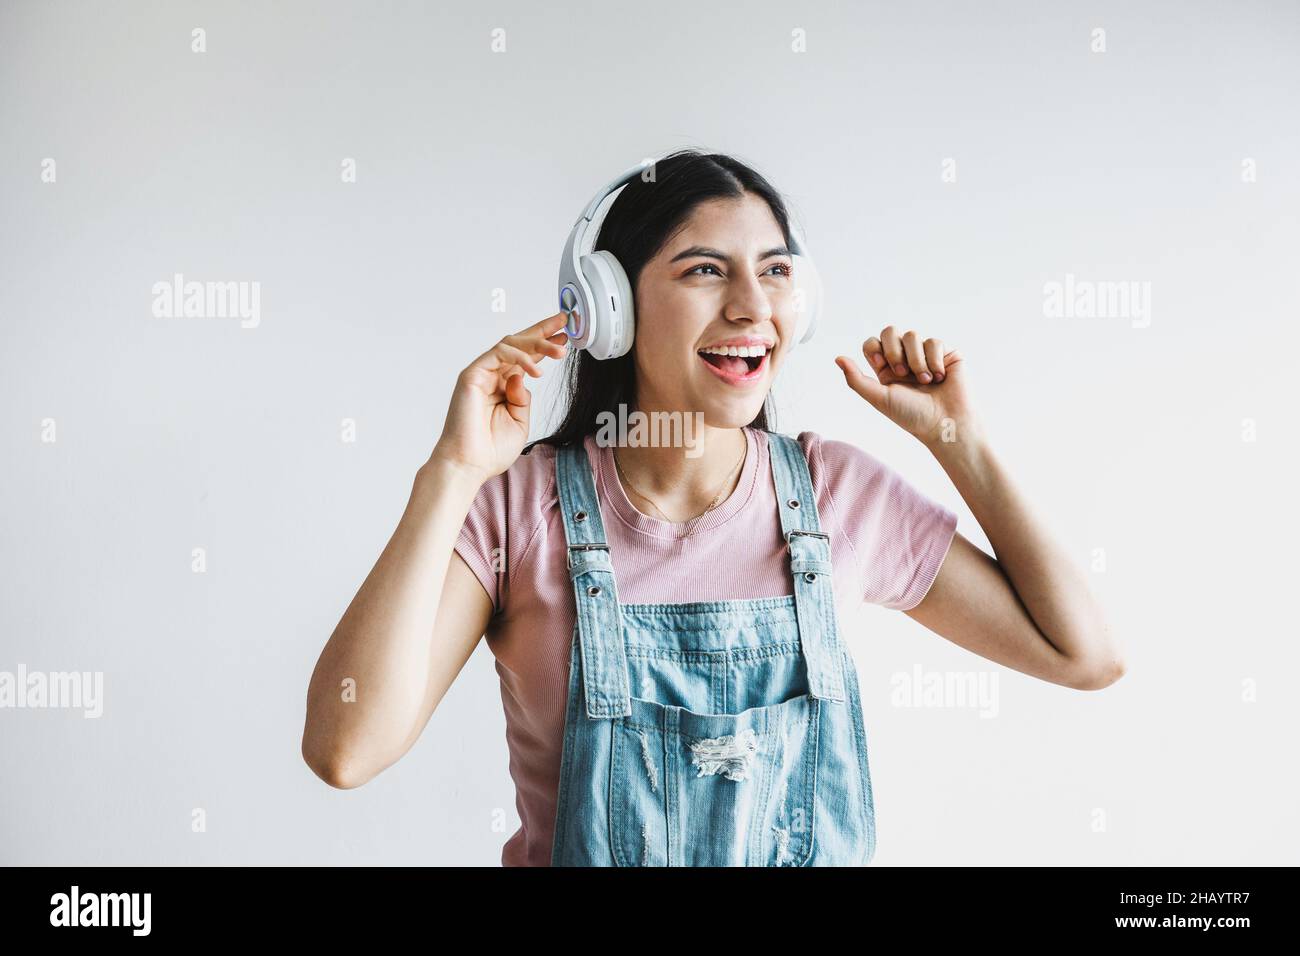 Portrait of latin young smiling woman with headphones, dancing and listening to music on a white background in Latin America Stock Photo